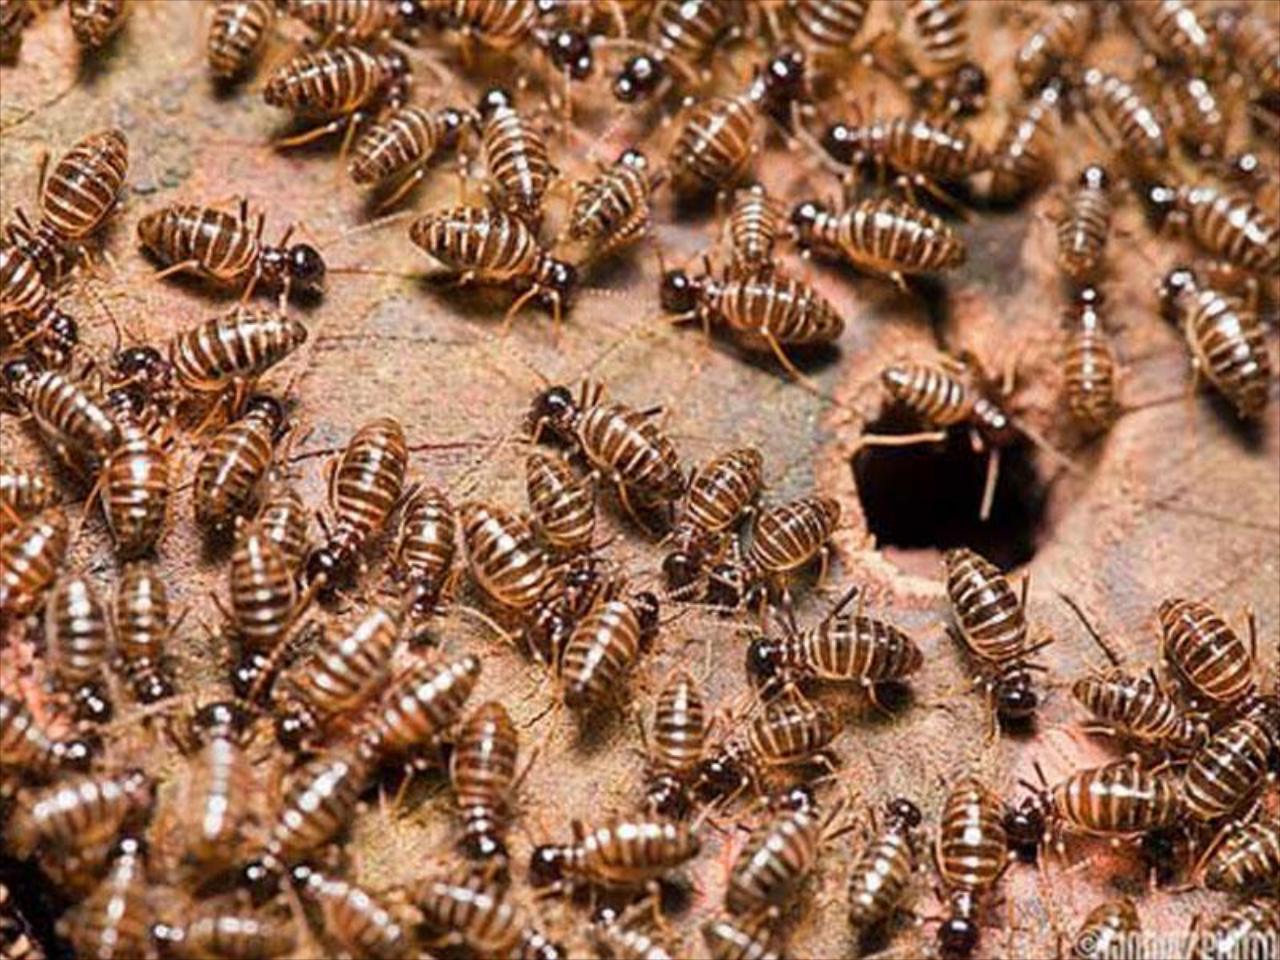 A Termite Inspection Can Save Your Home or Business